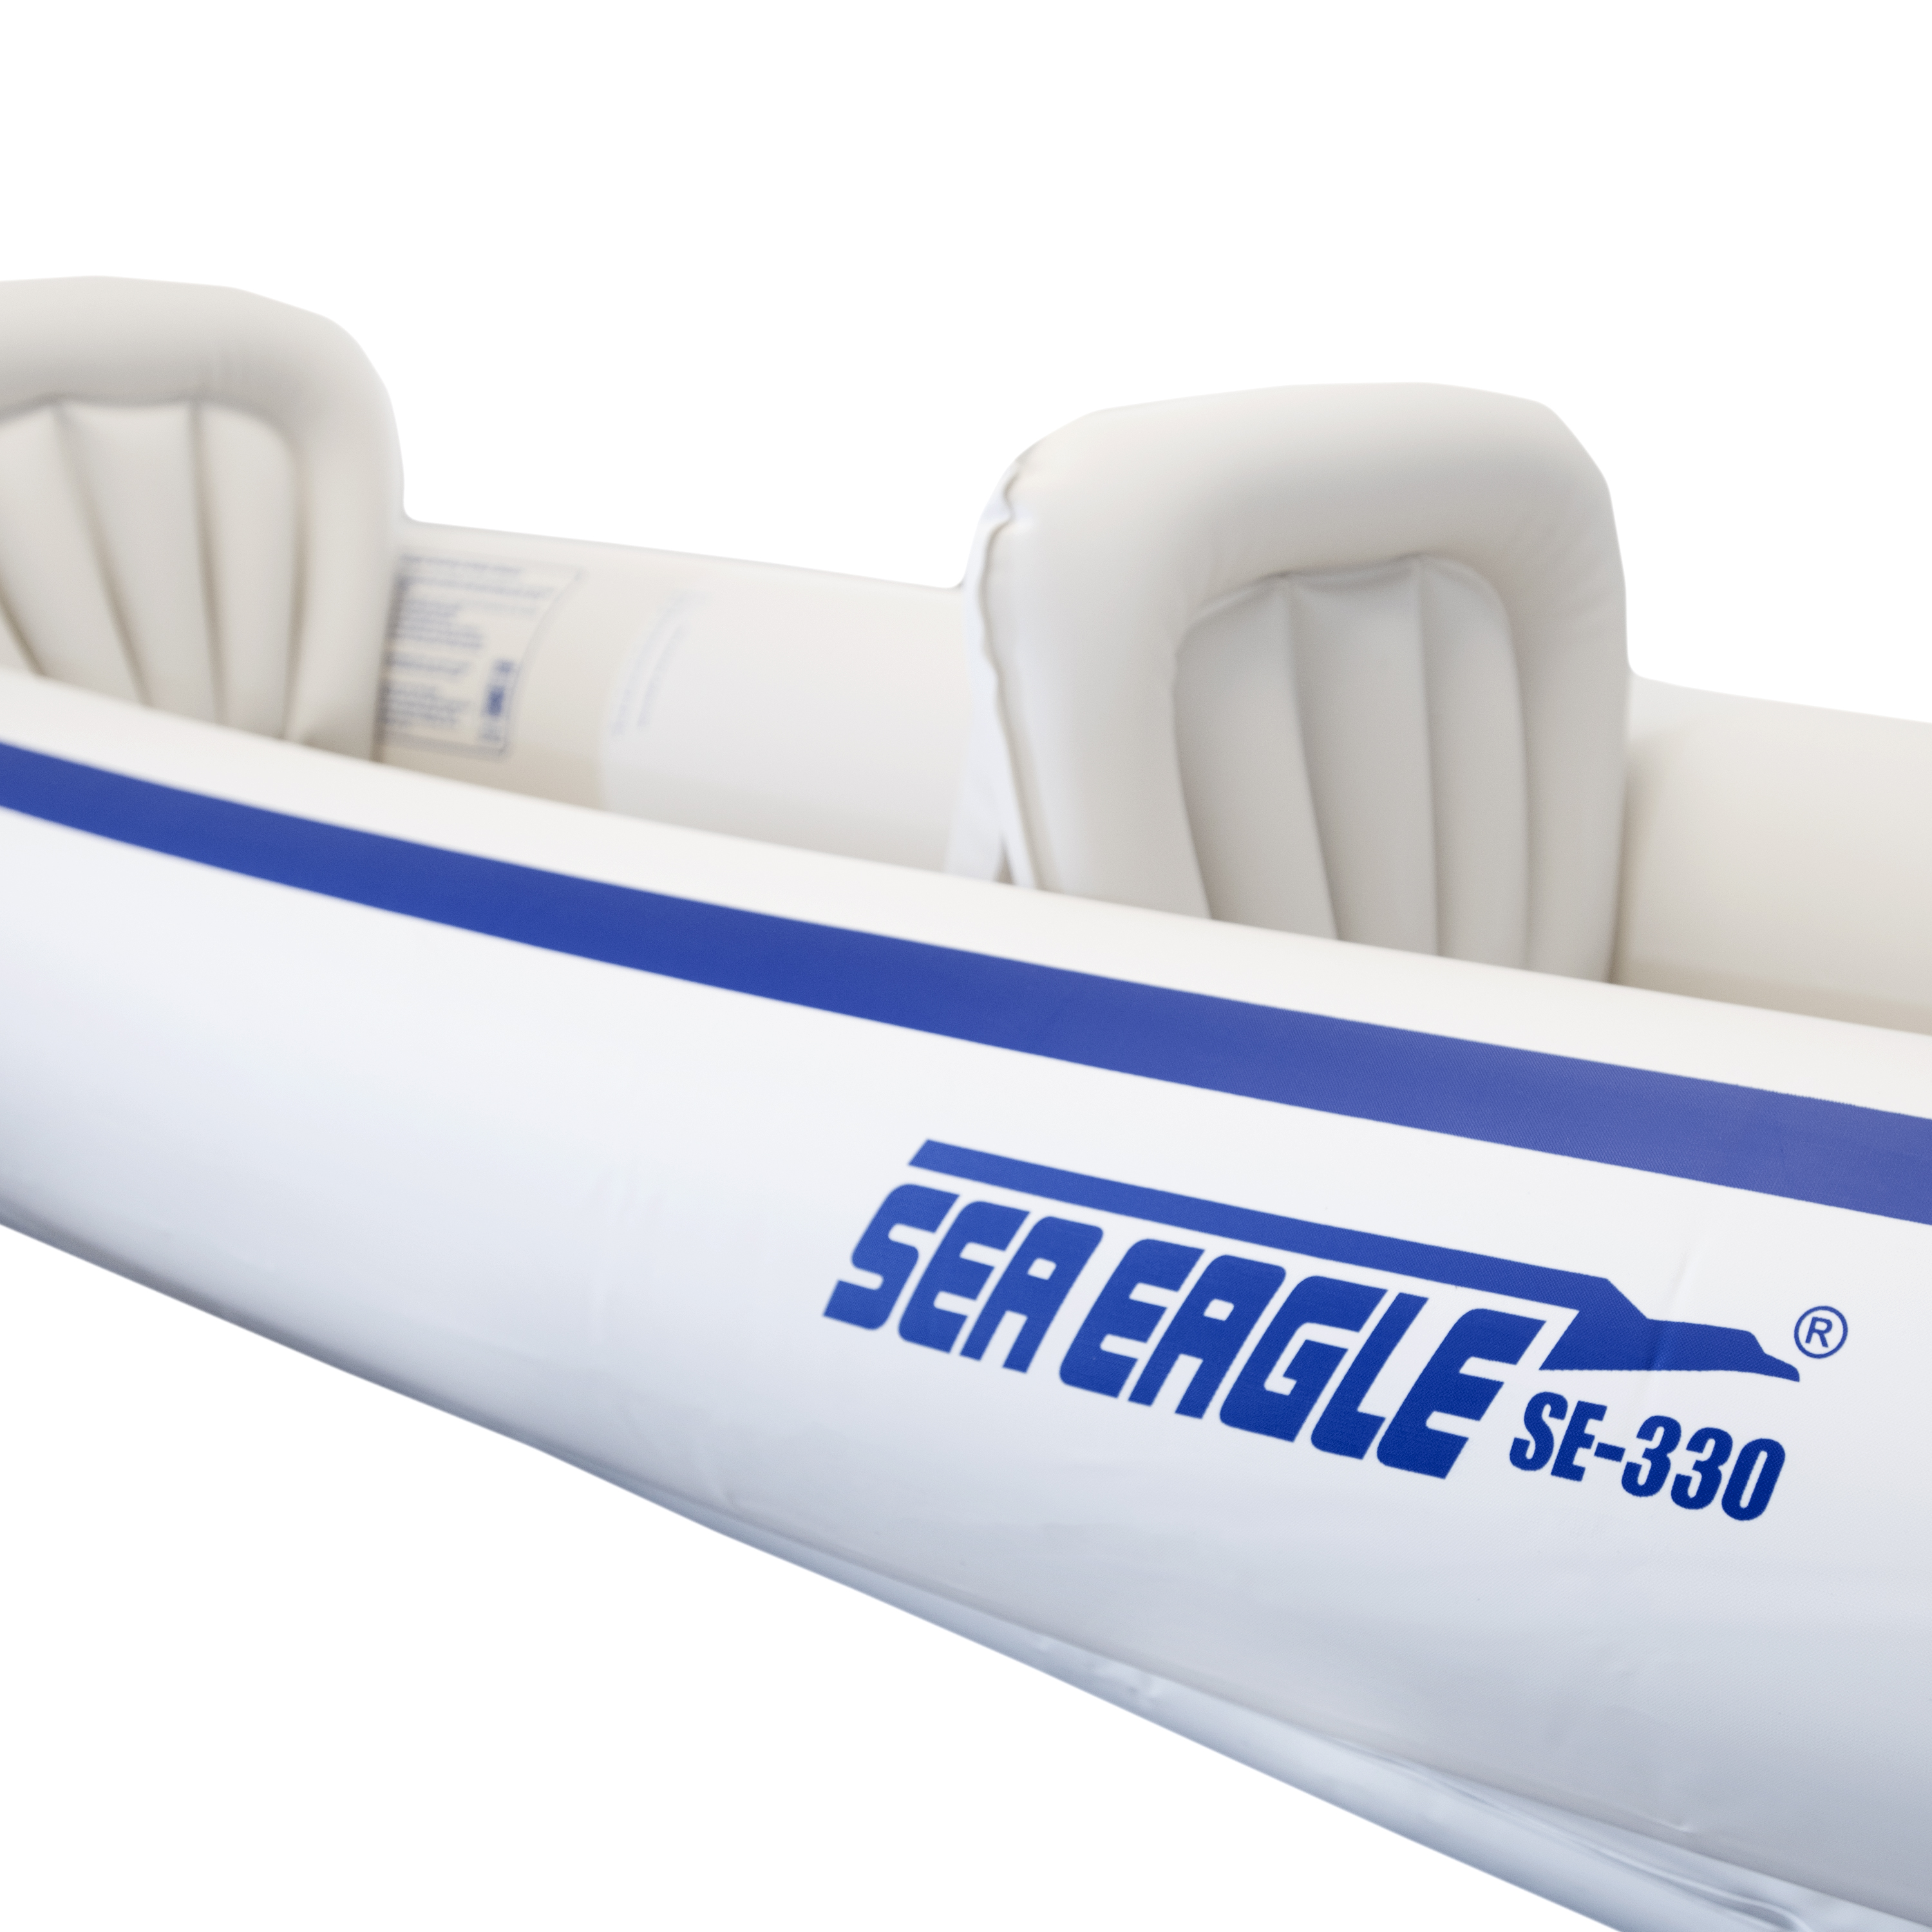 Sea Eagle 330 Start-Up 2 Person Inflatable Kayak with Paddles - image 3 of 8